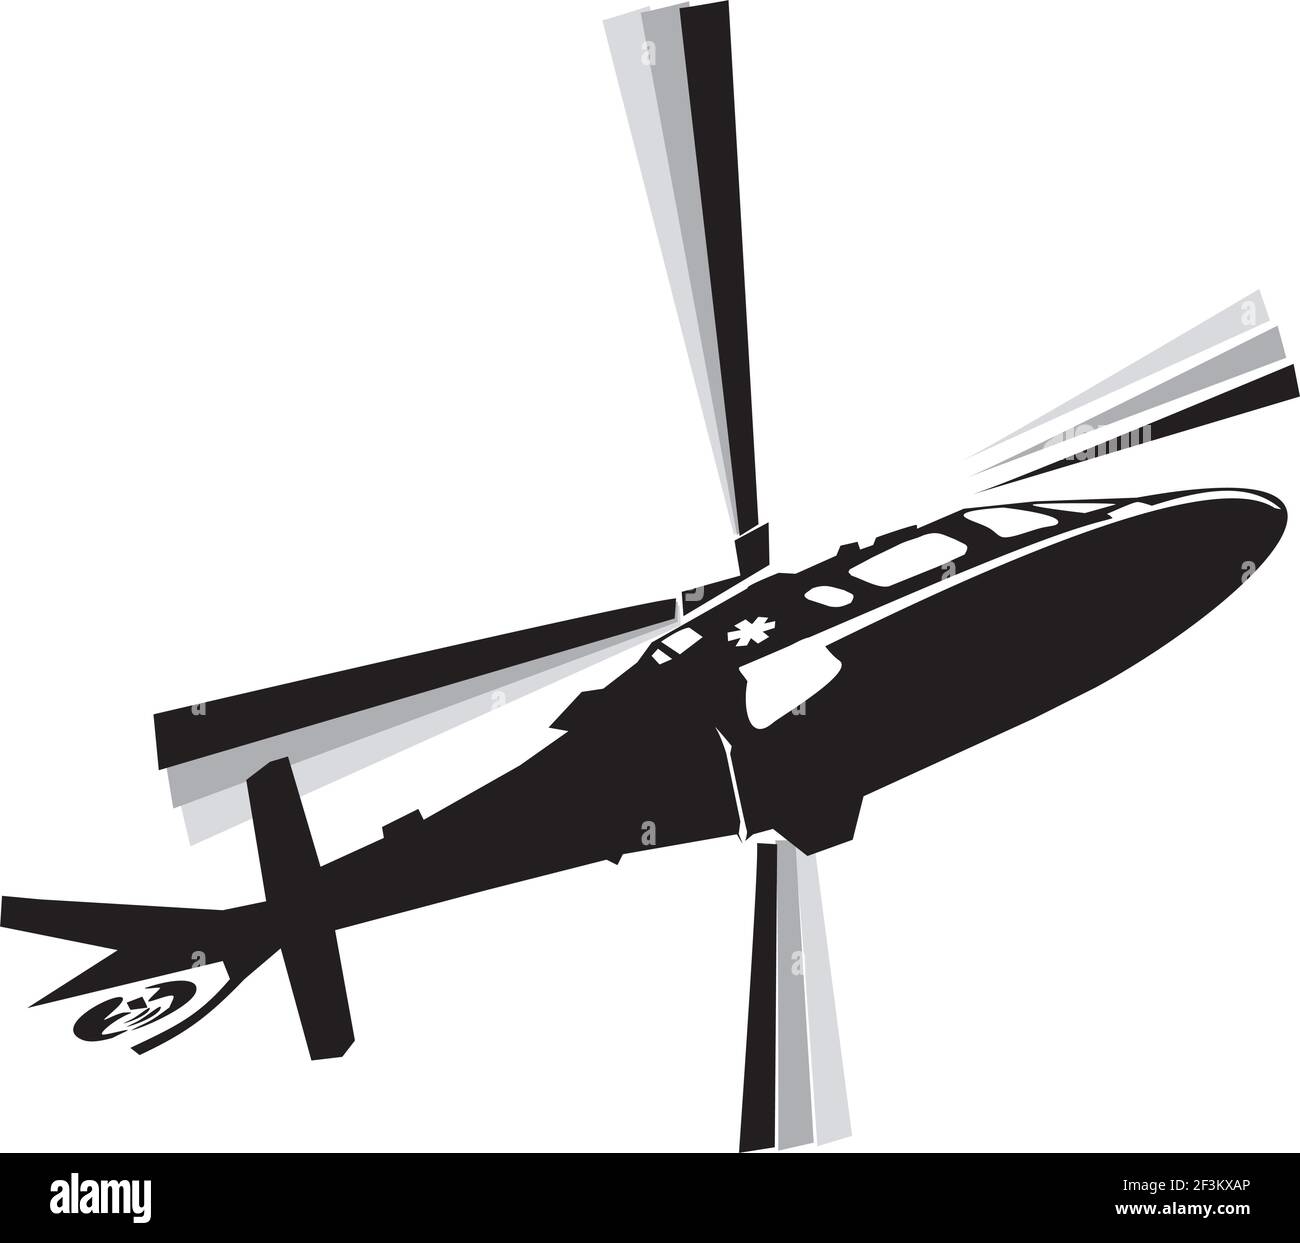 Helicopter in the sky Stock Vector